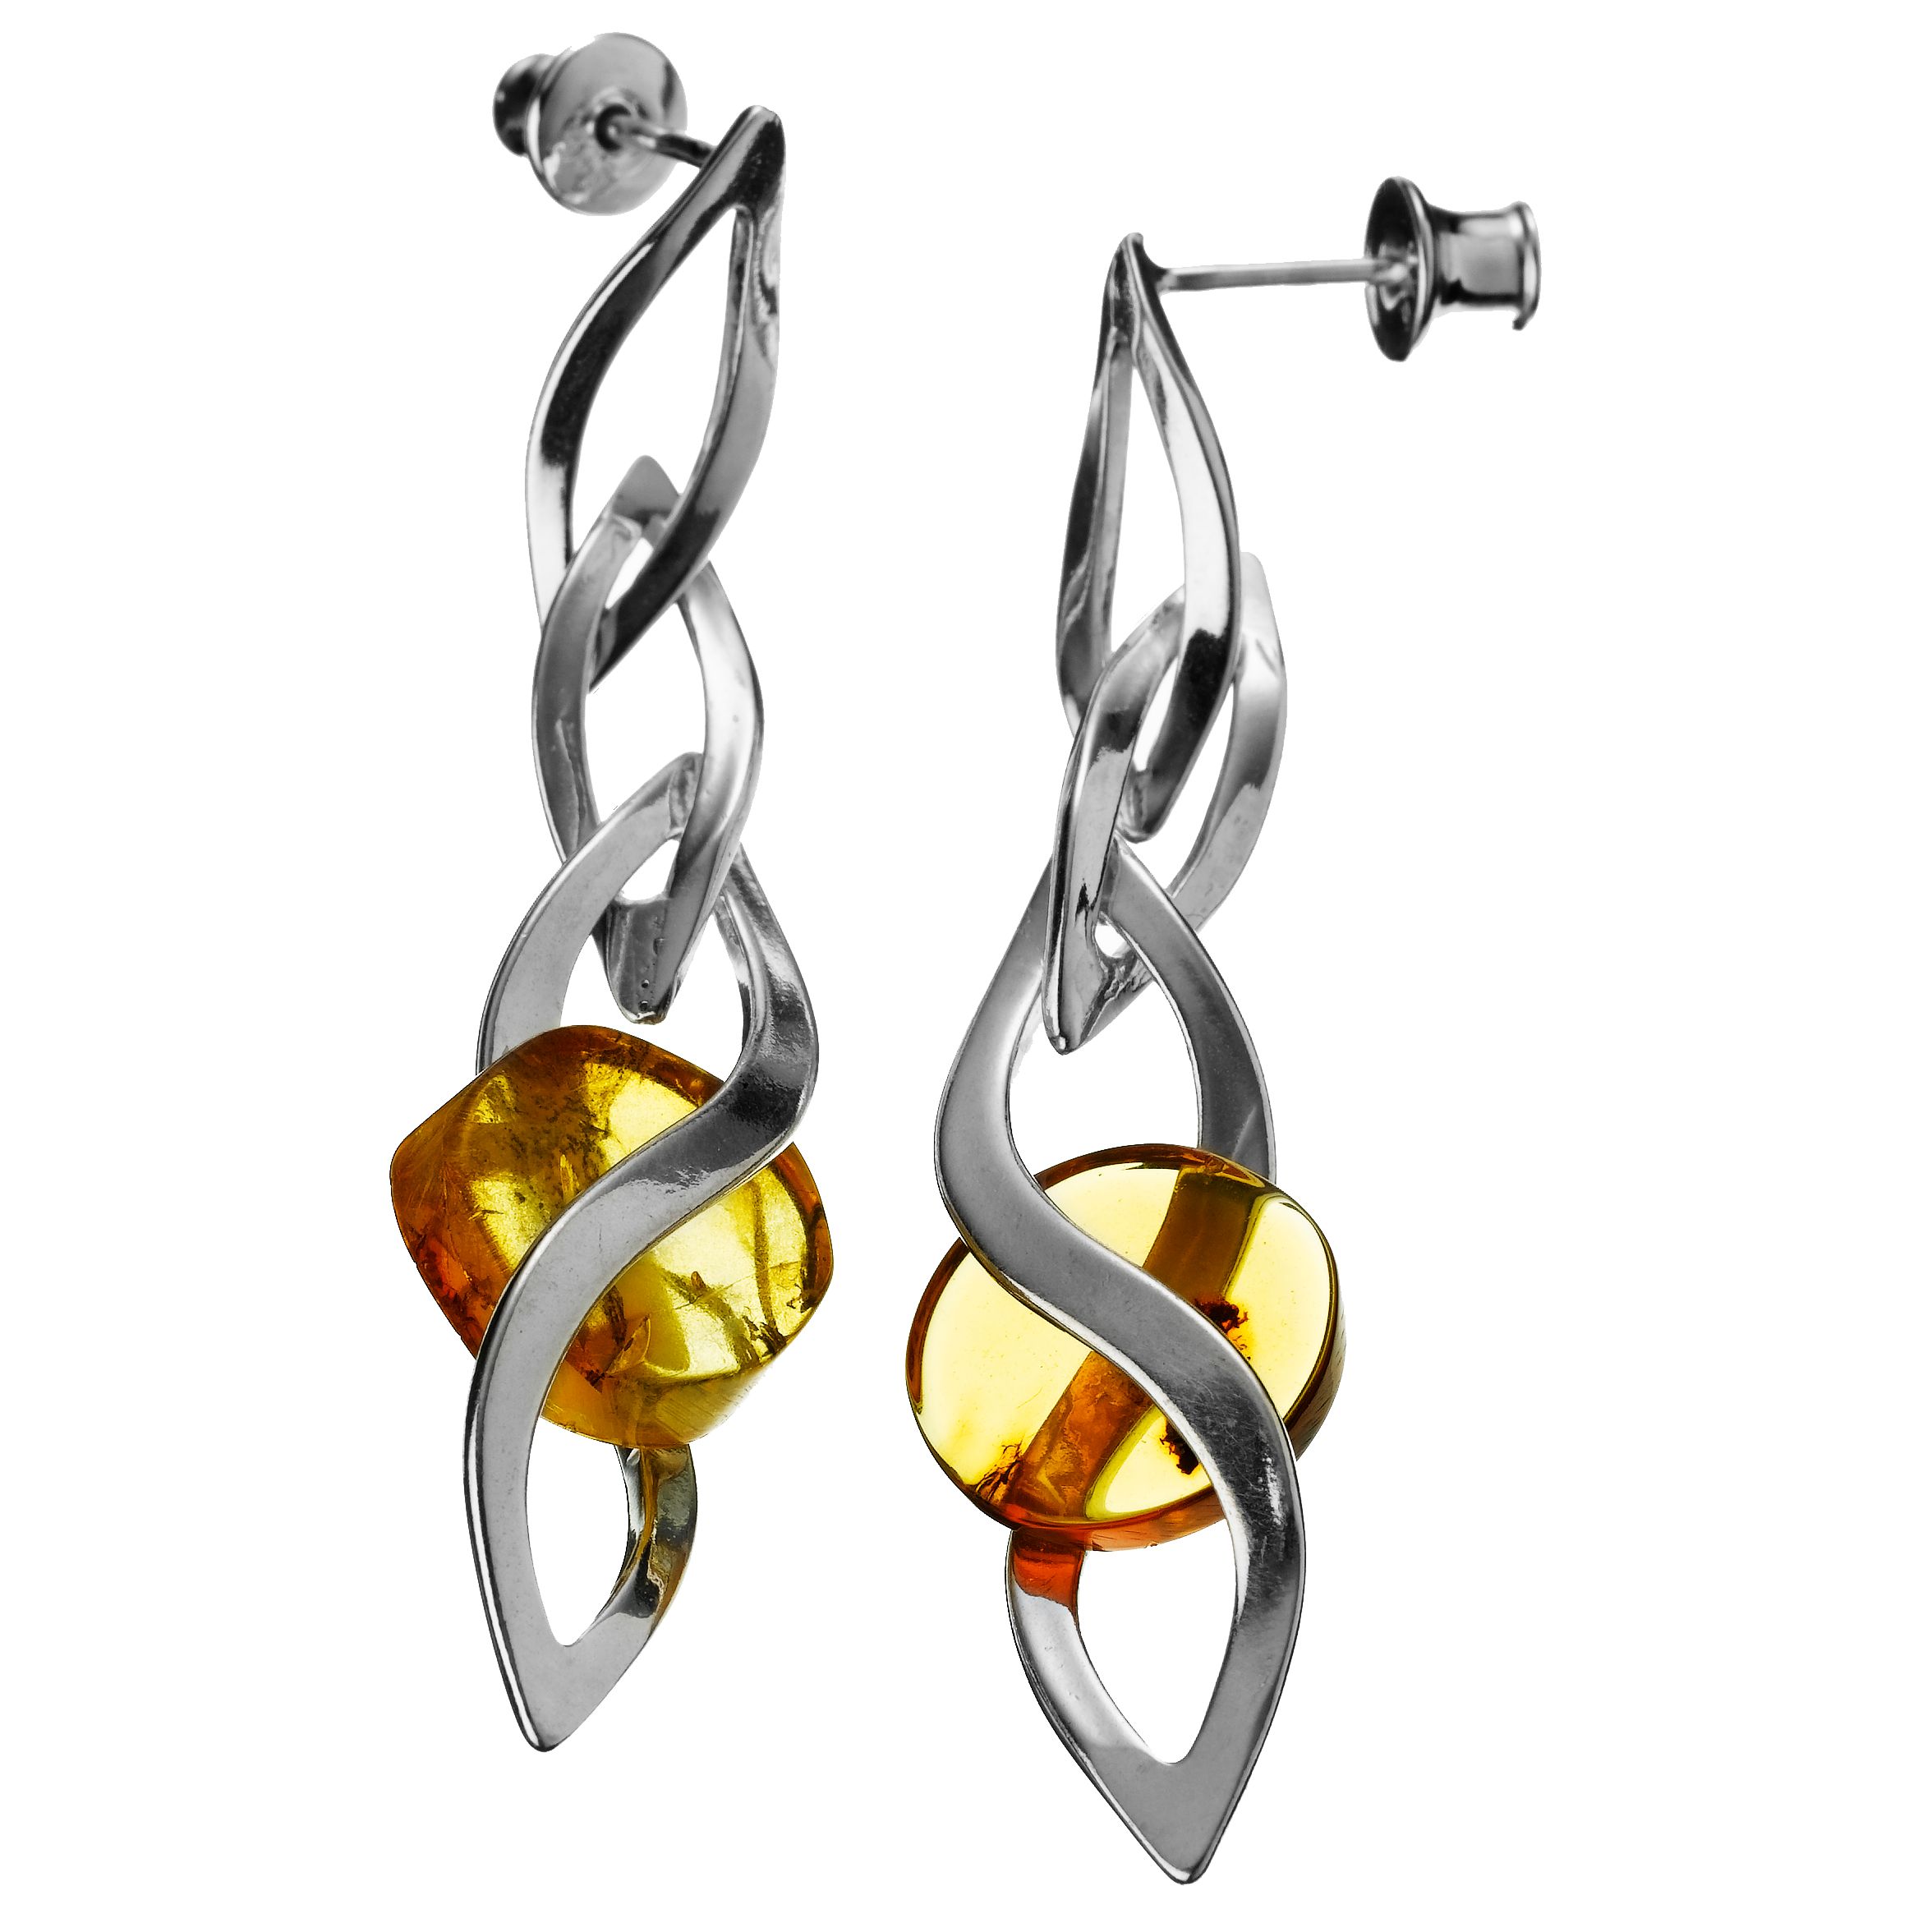 Goldmajor Contemporary Amber Disc and Silver Drop Earrings